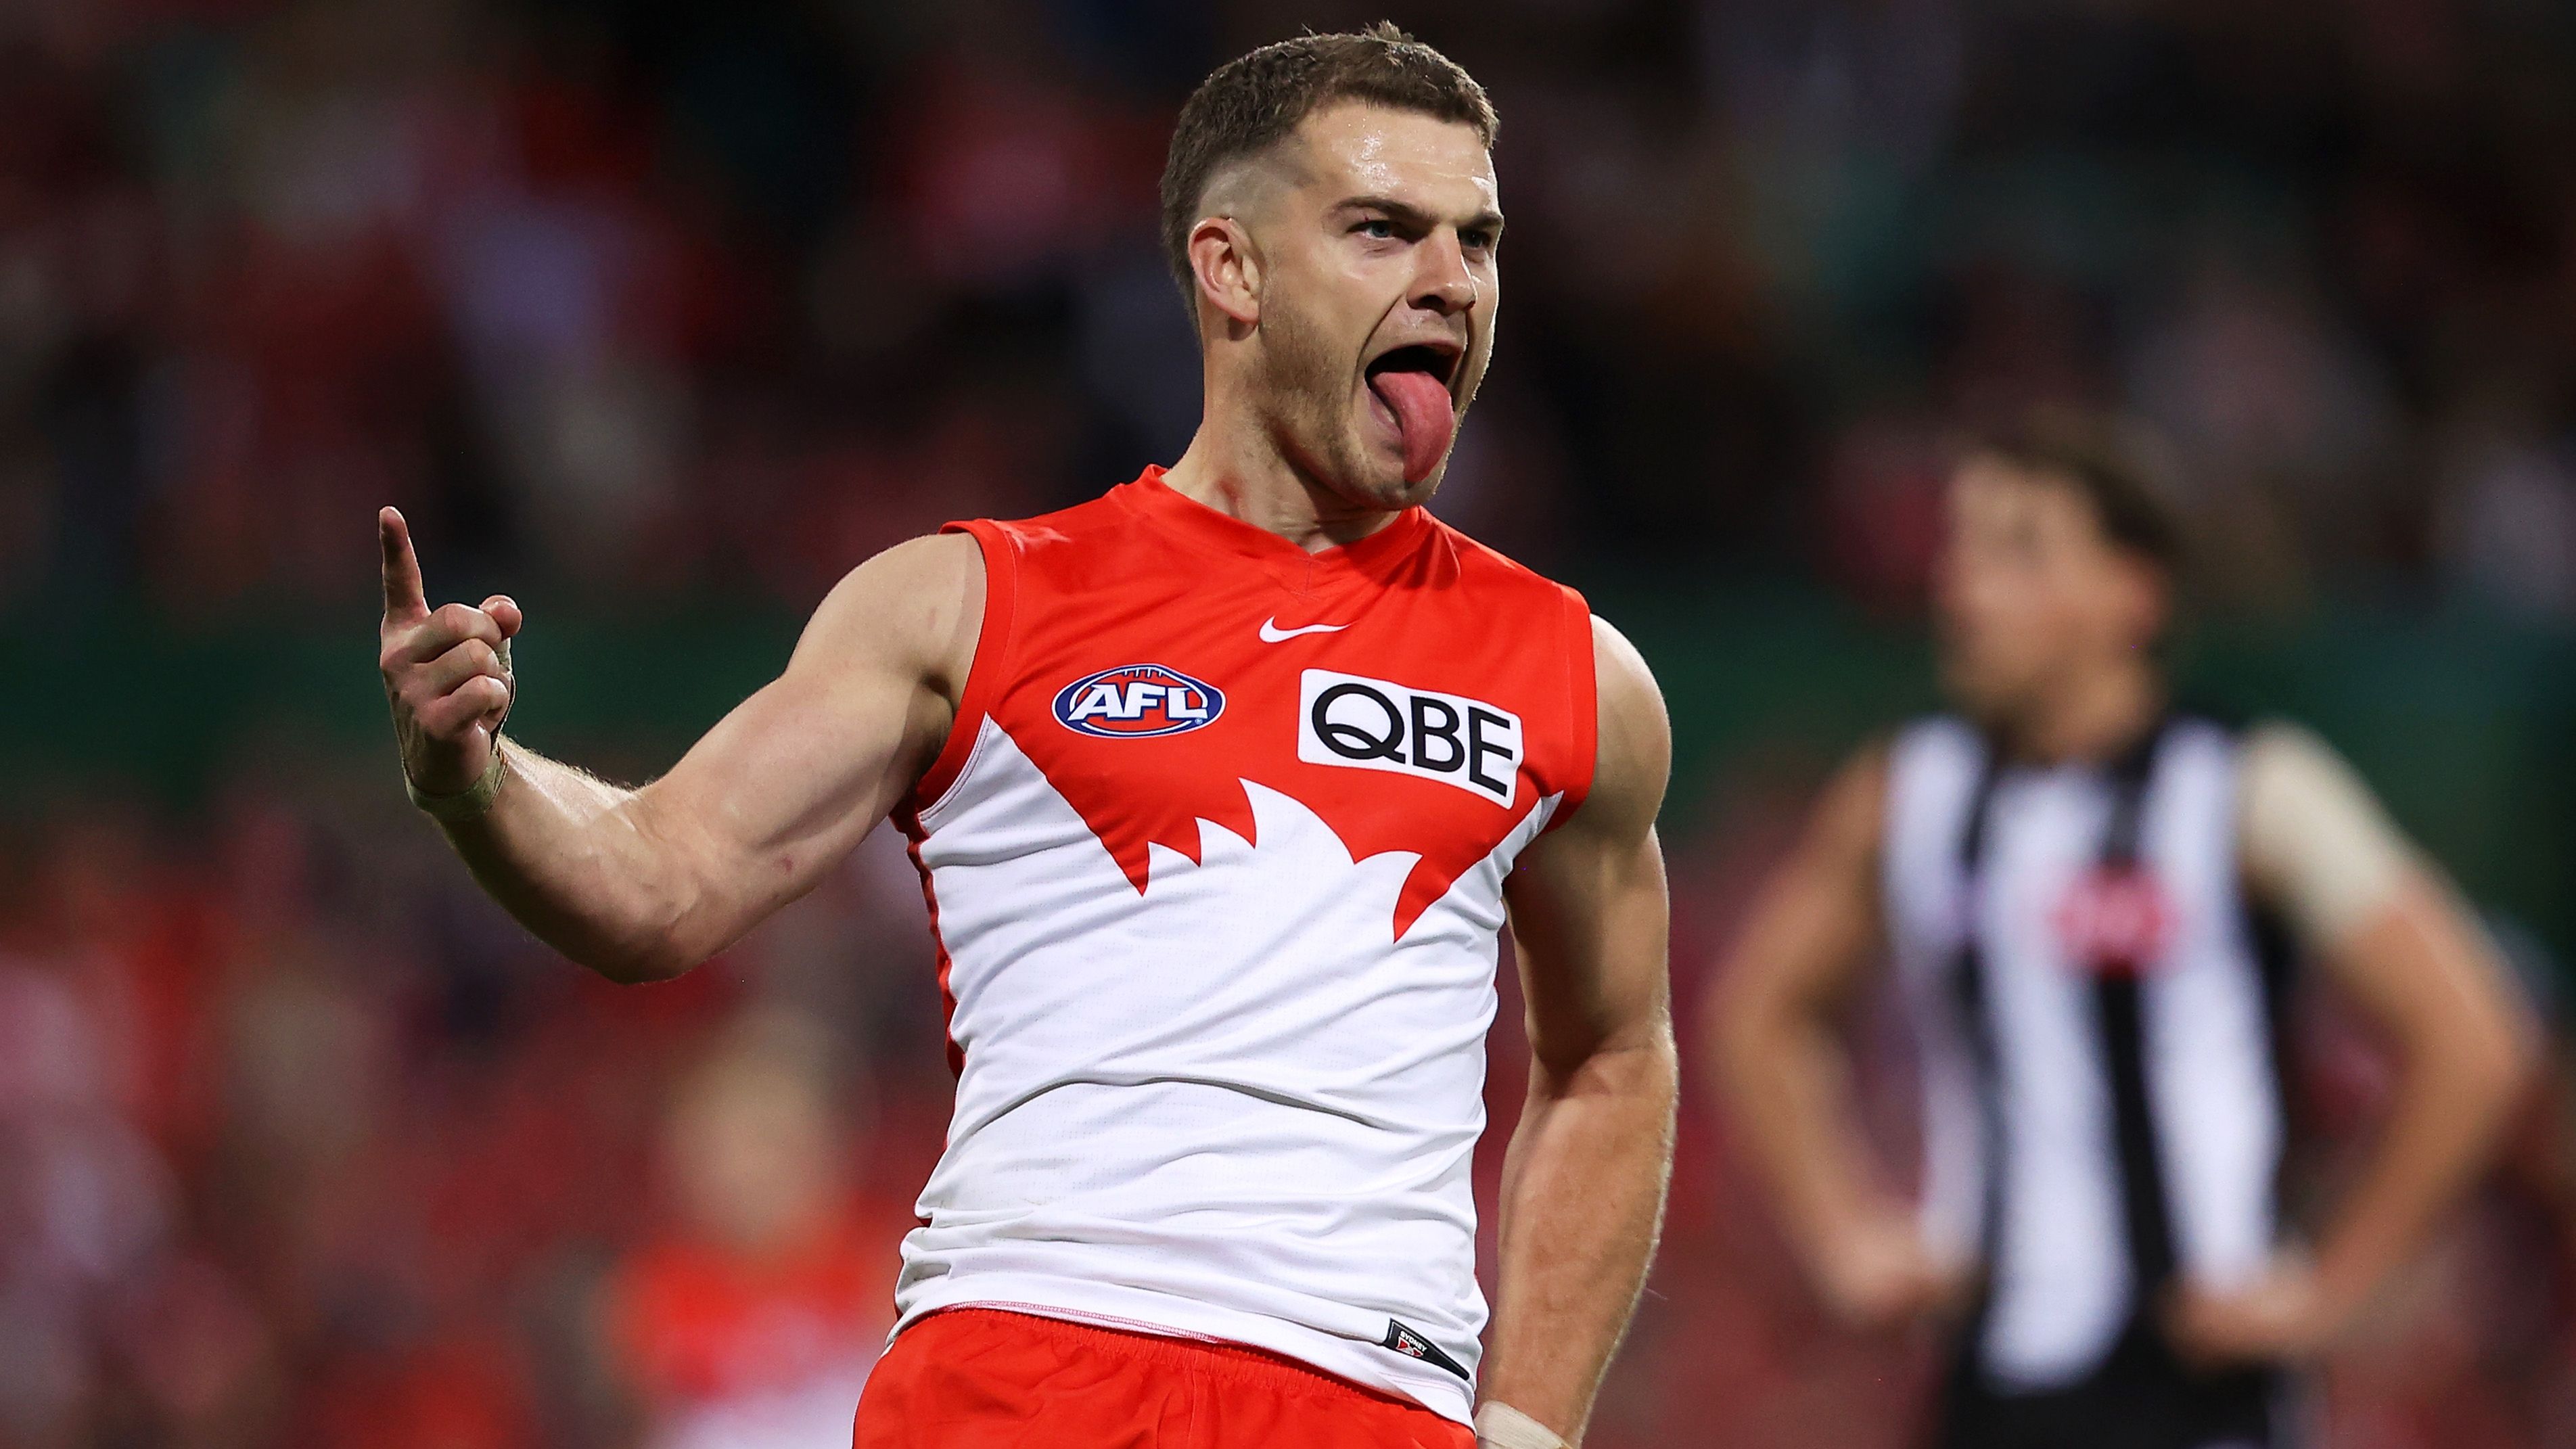 AFL grand final match-up confirmed with Sydney Swans to meet Geelong Cats